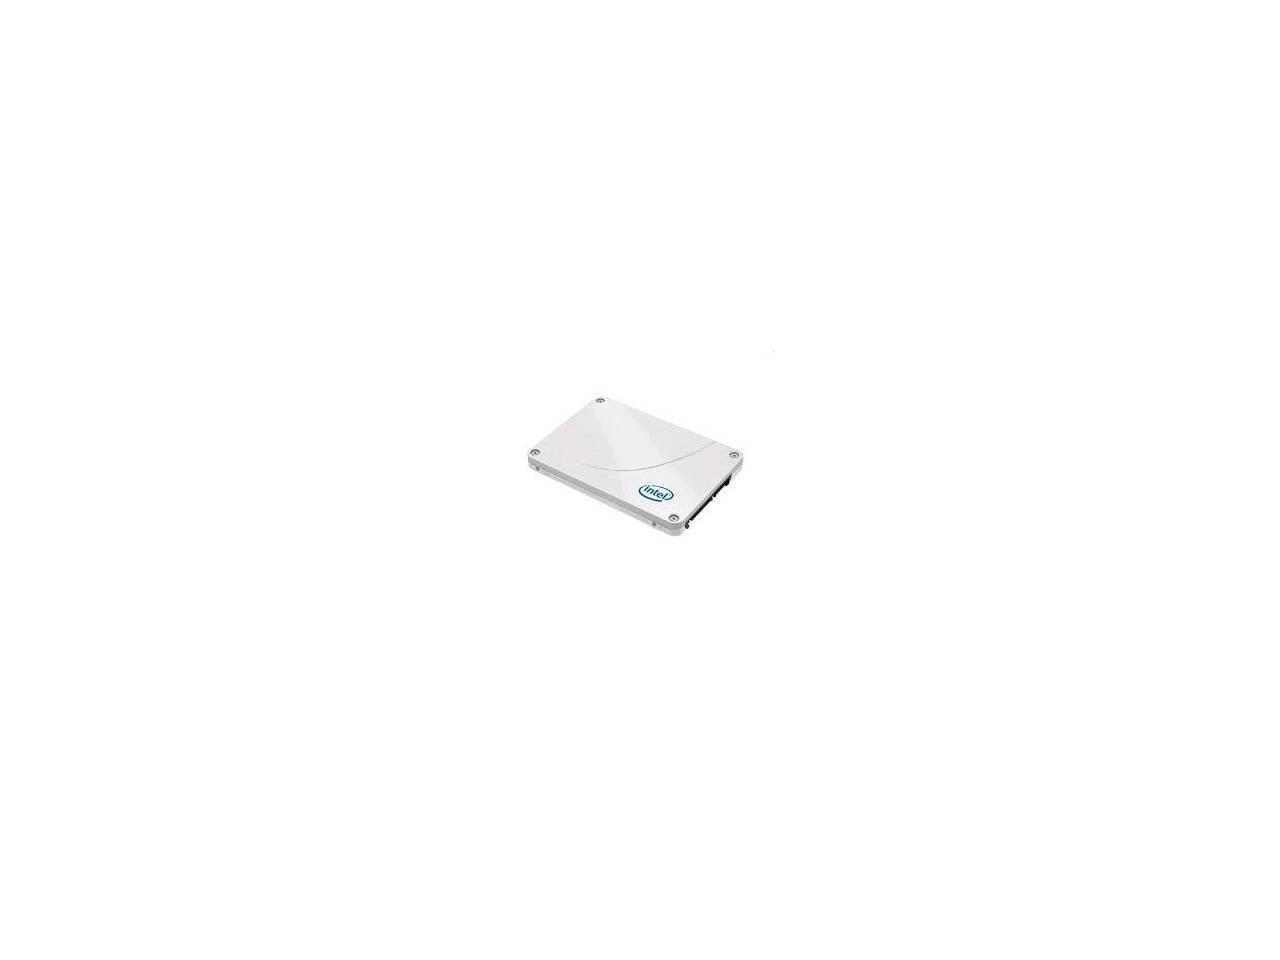 Solidigm™ Solid State Drive D3-S4620 Series (960GB, 2.5in SATA 6Gb/s, 3D4, TLC)